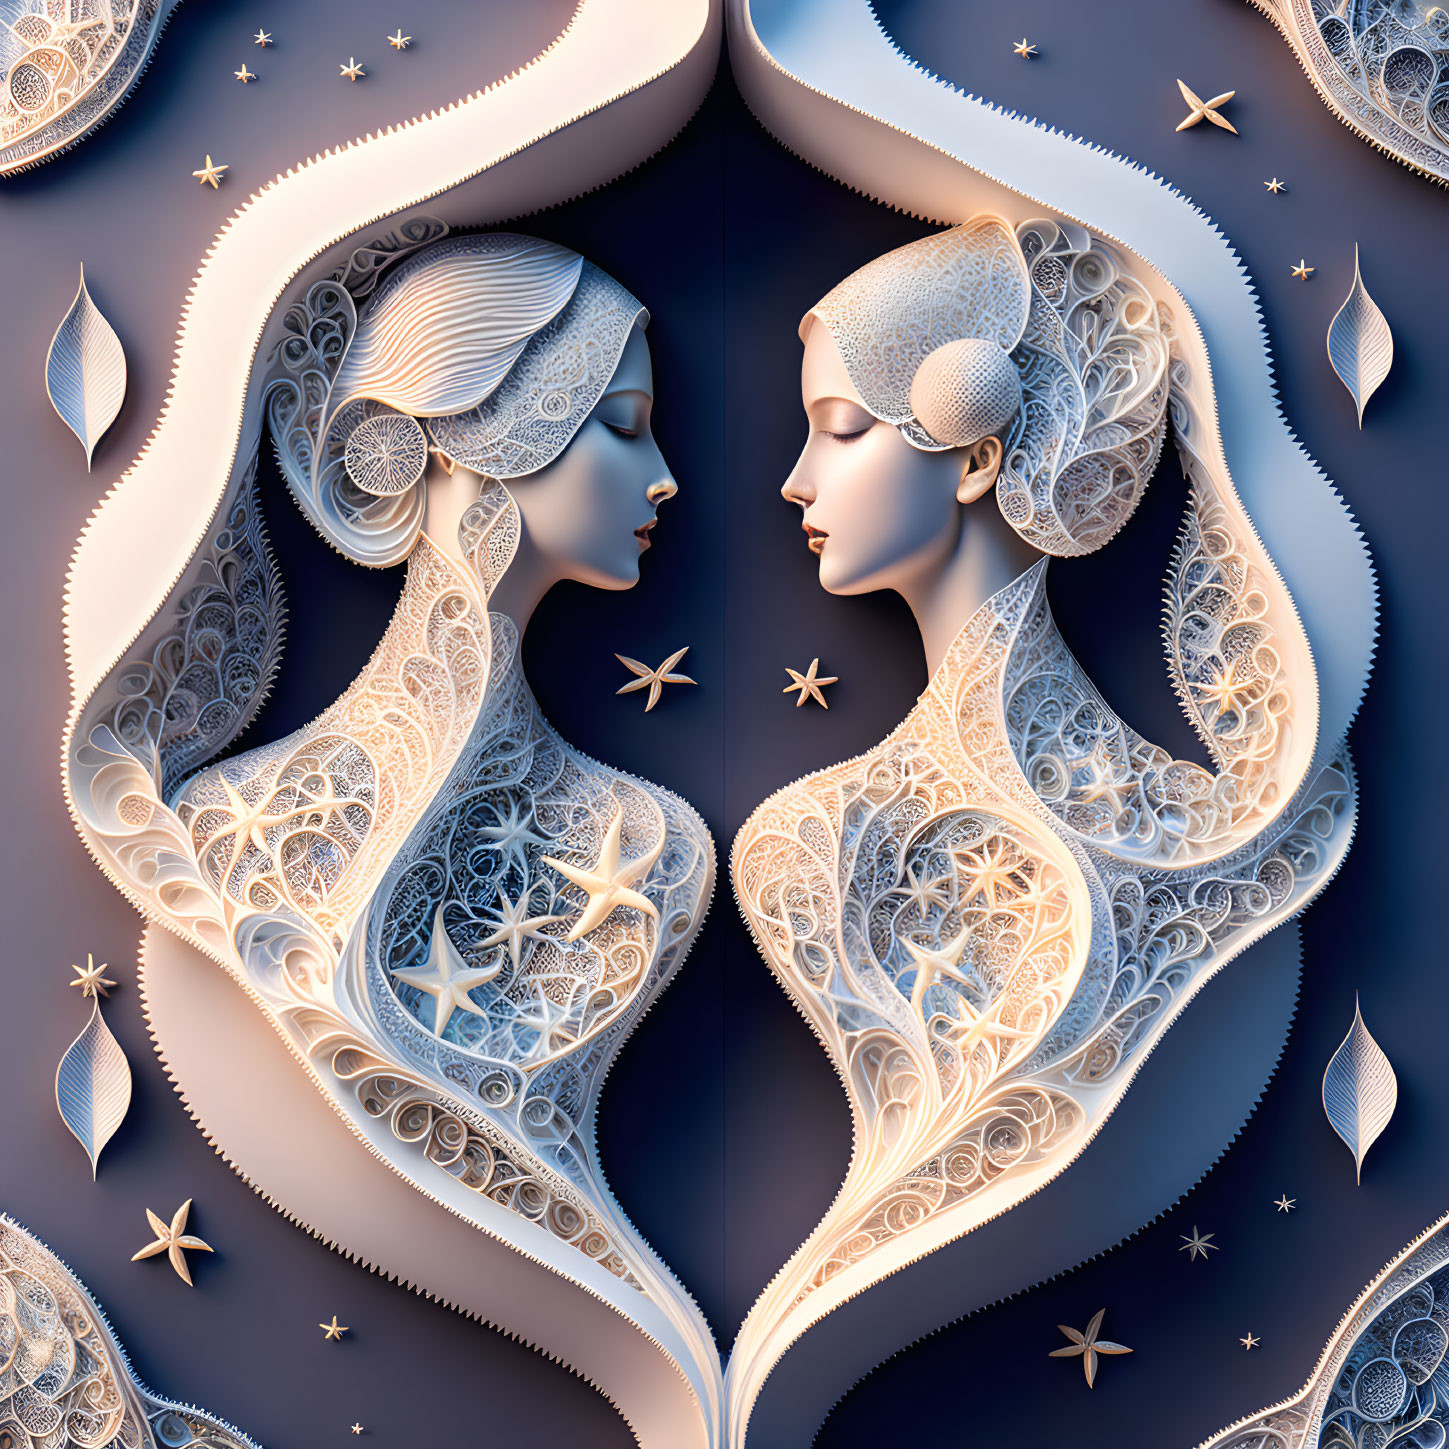 Symmetrical celestial-themed faces with stars and leaves on blue background